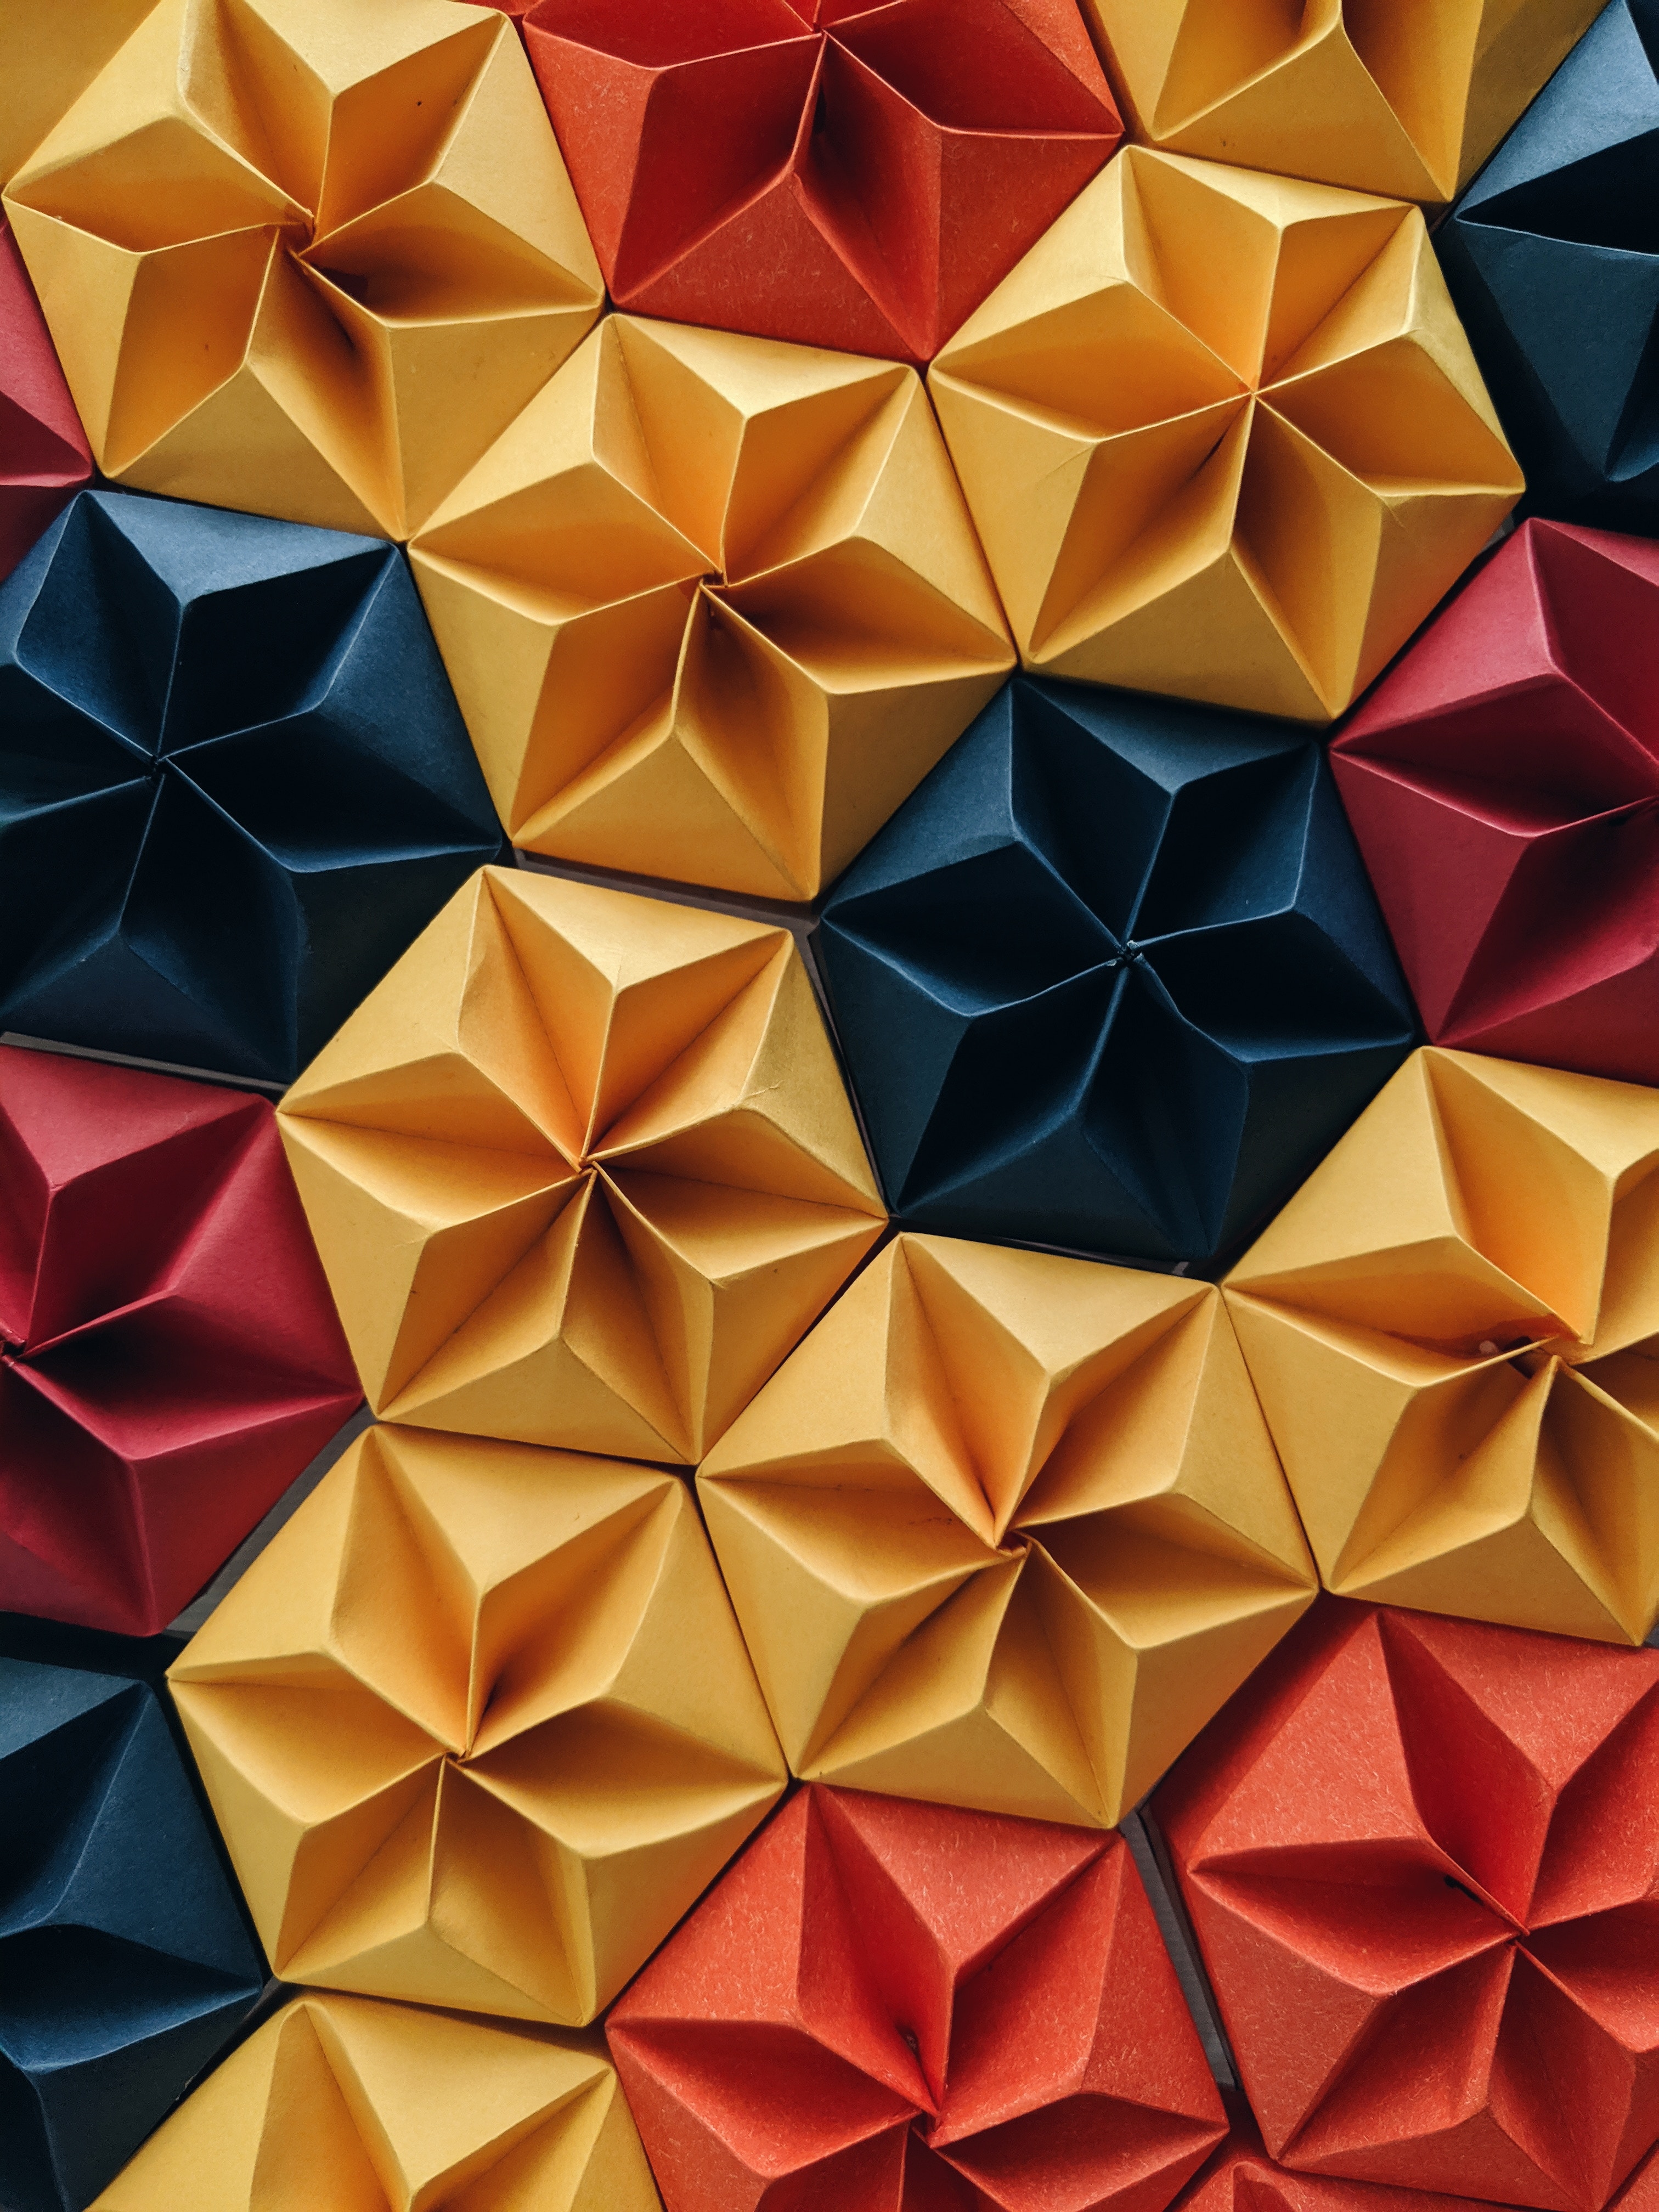 multicolored, motley, texture, textures, shape, shapes, paper, origami